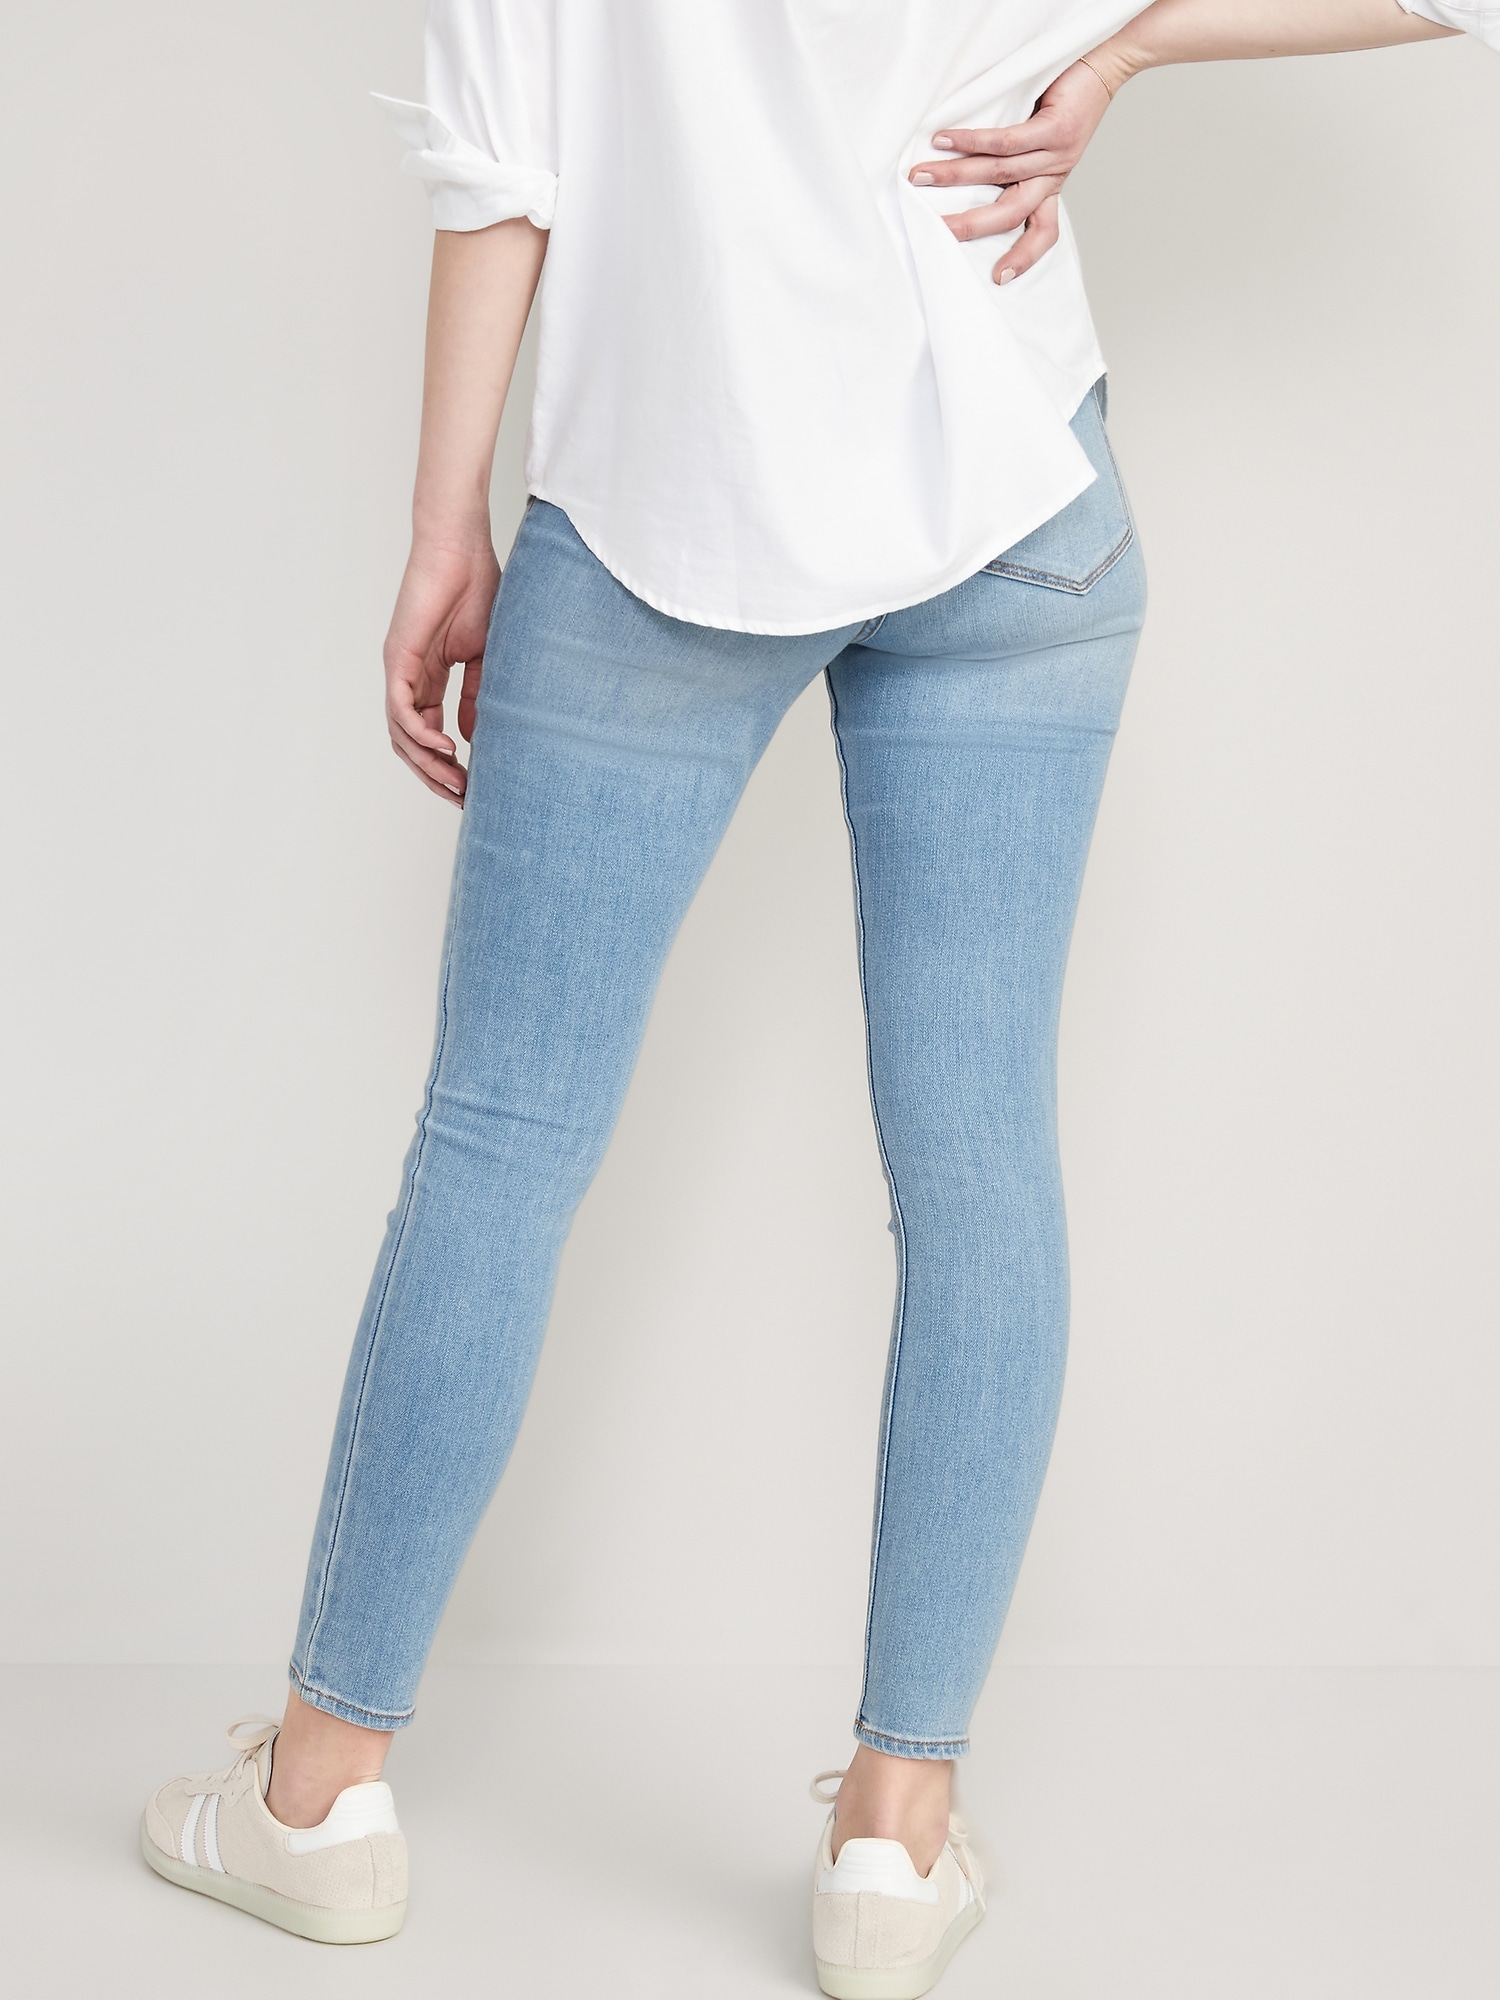 Buy Stylish Denim Jeggings For Women Online In India At Discounted Prices-sgquangbinhtourist.com.vn